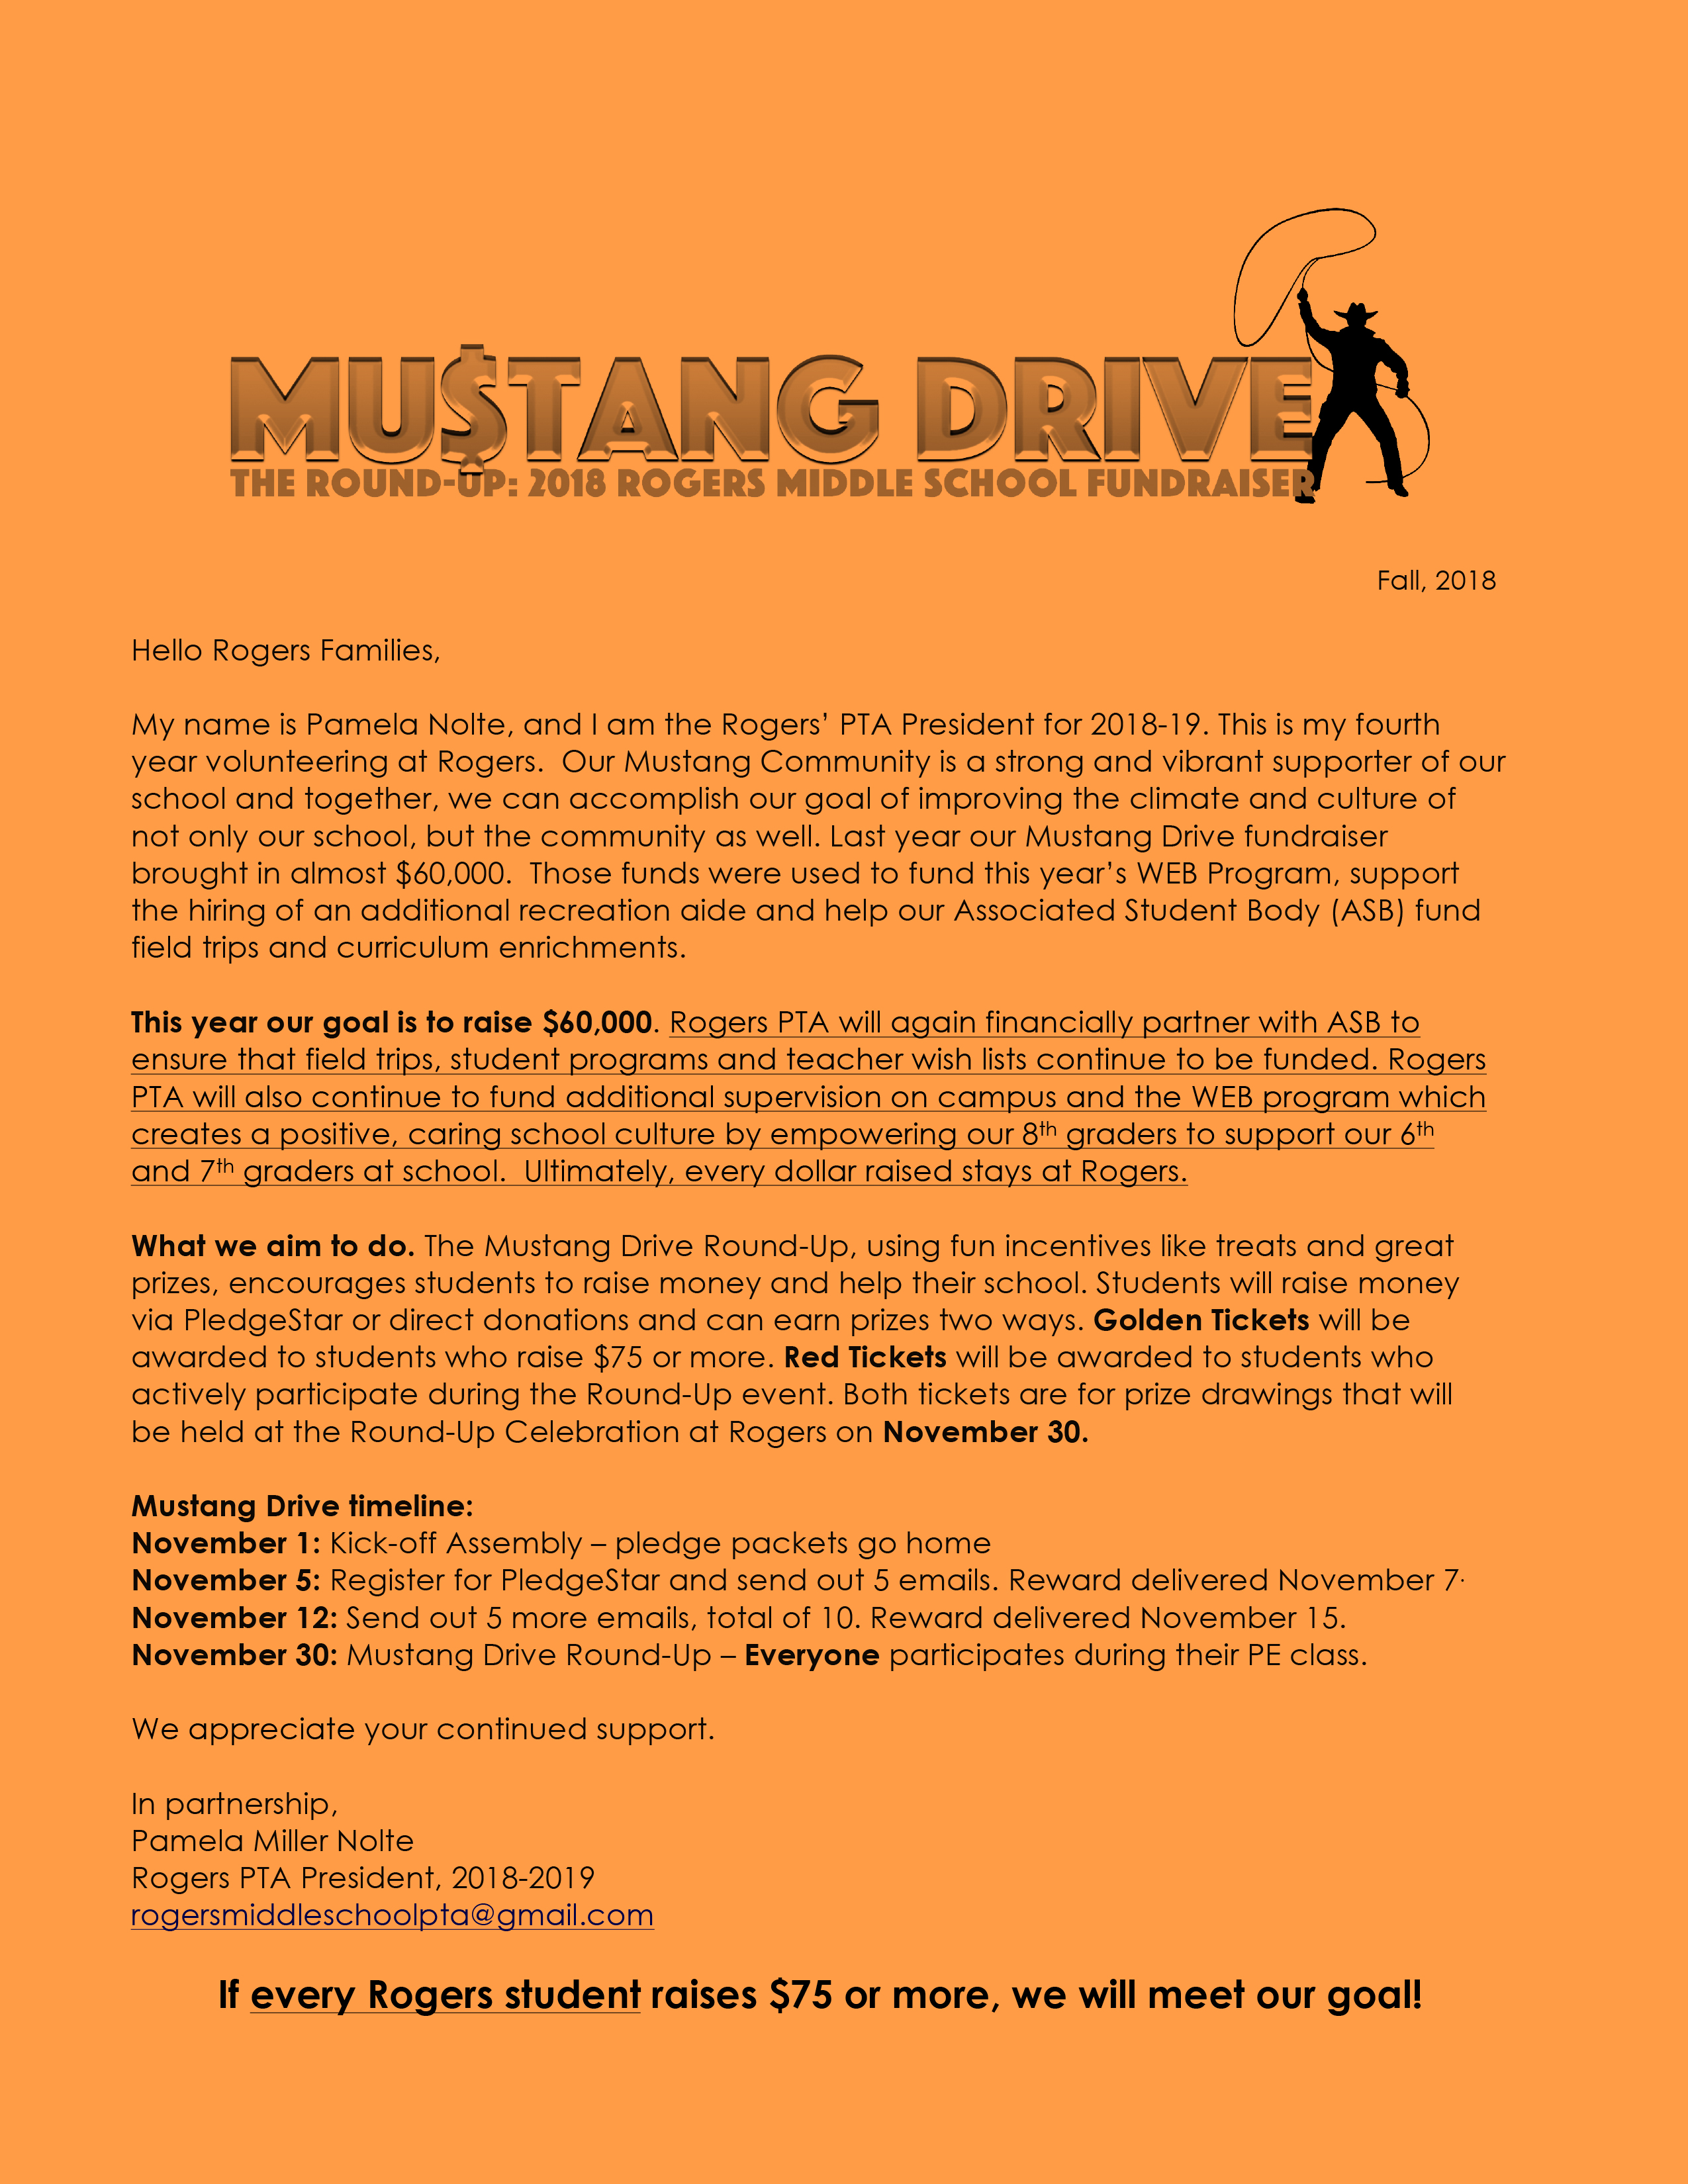 Microsoft Word - Mustang Drive Kickoff Letter 2018.docx